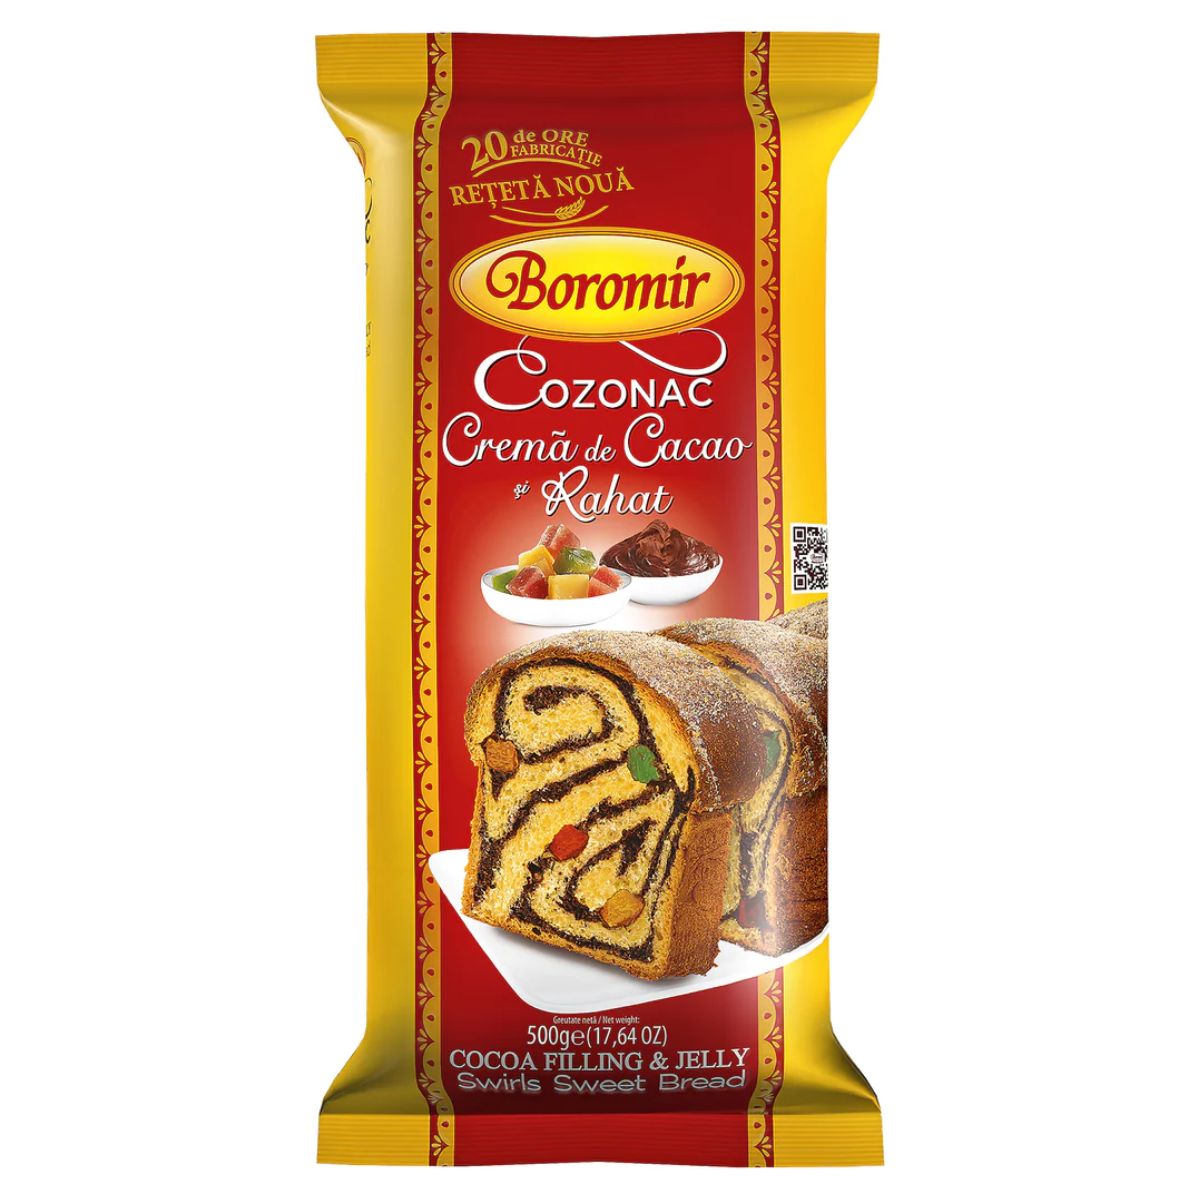 A package of Boromir - Cocoa & Jelly - 500g and cinnamon roll.